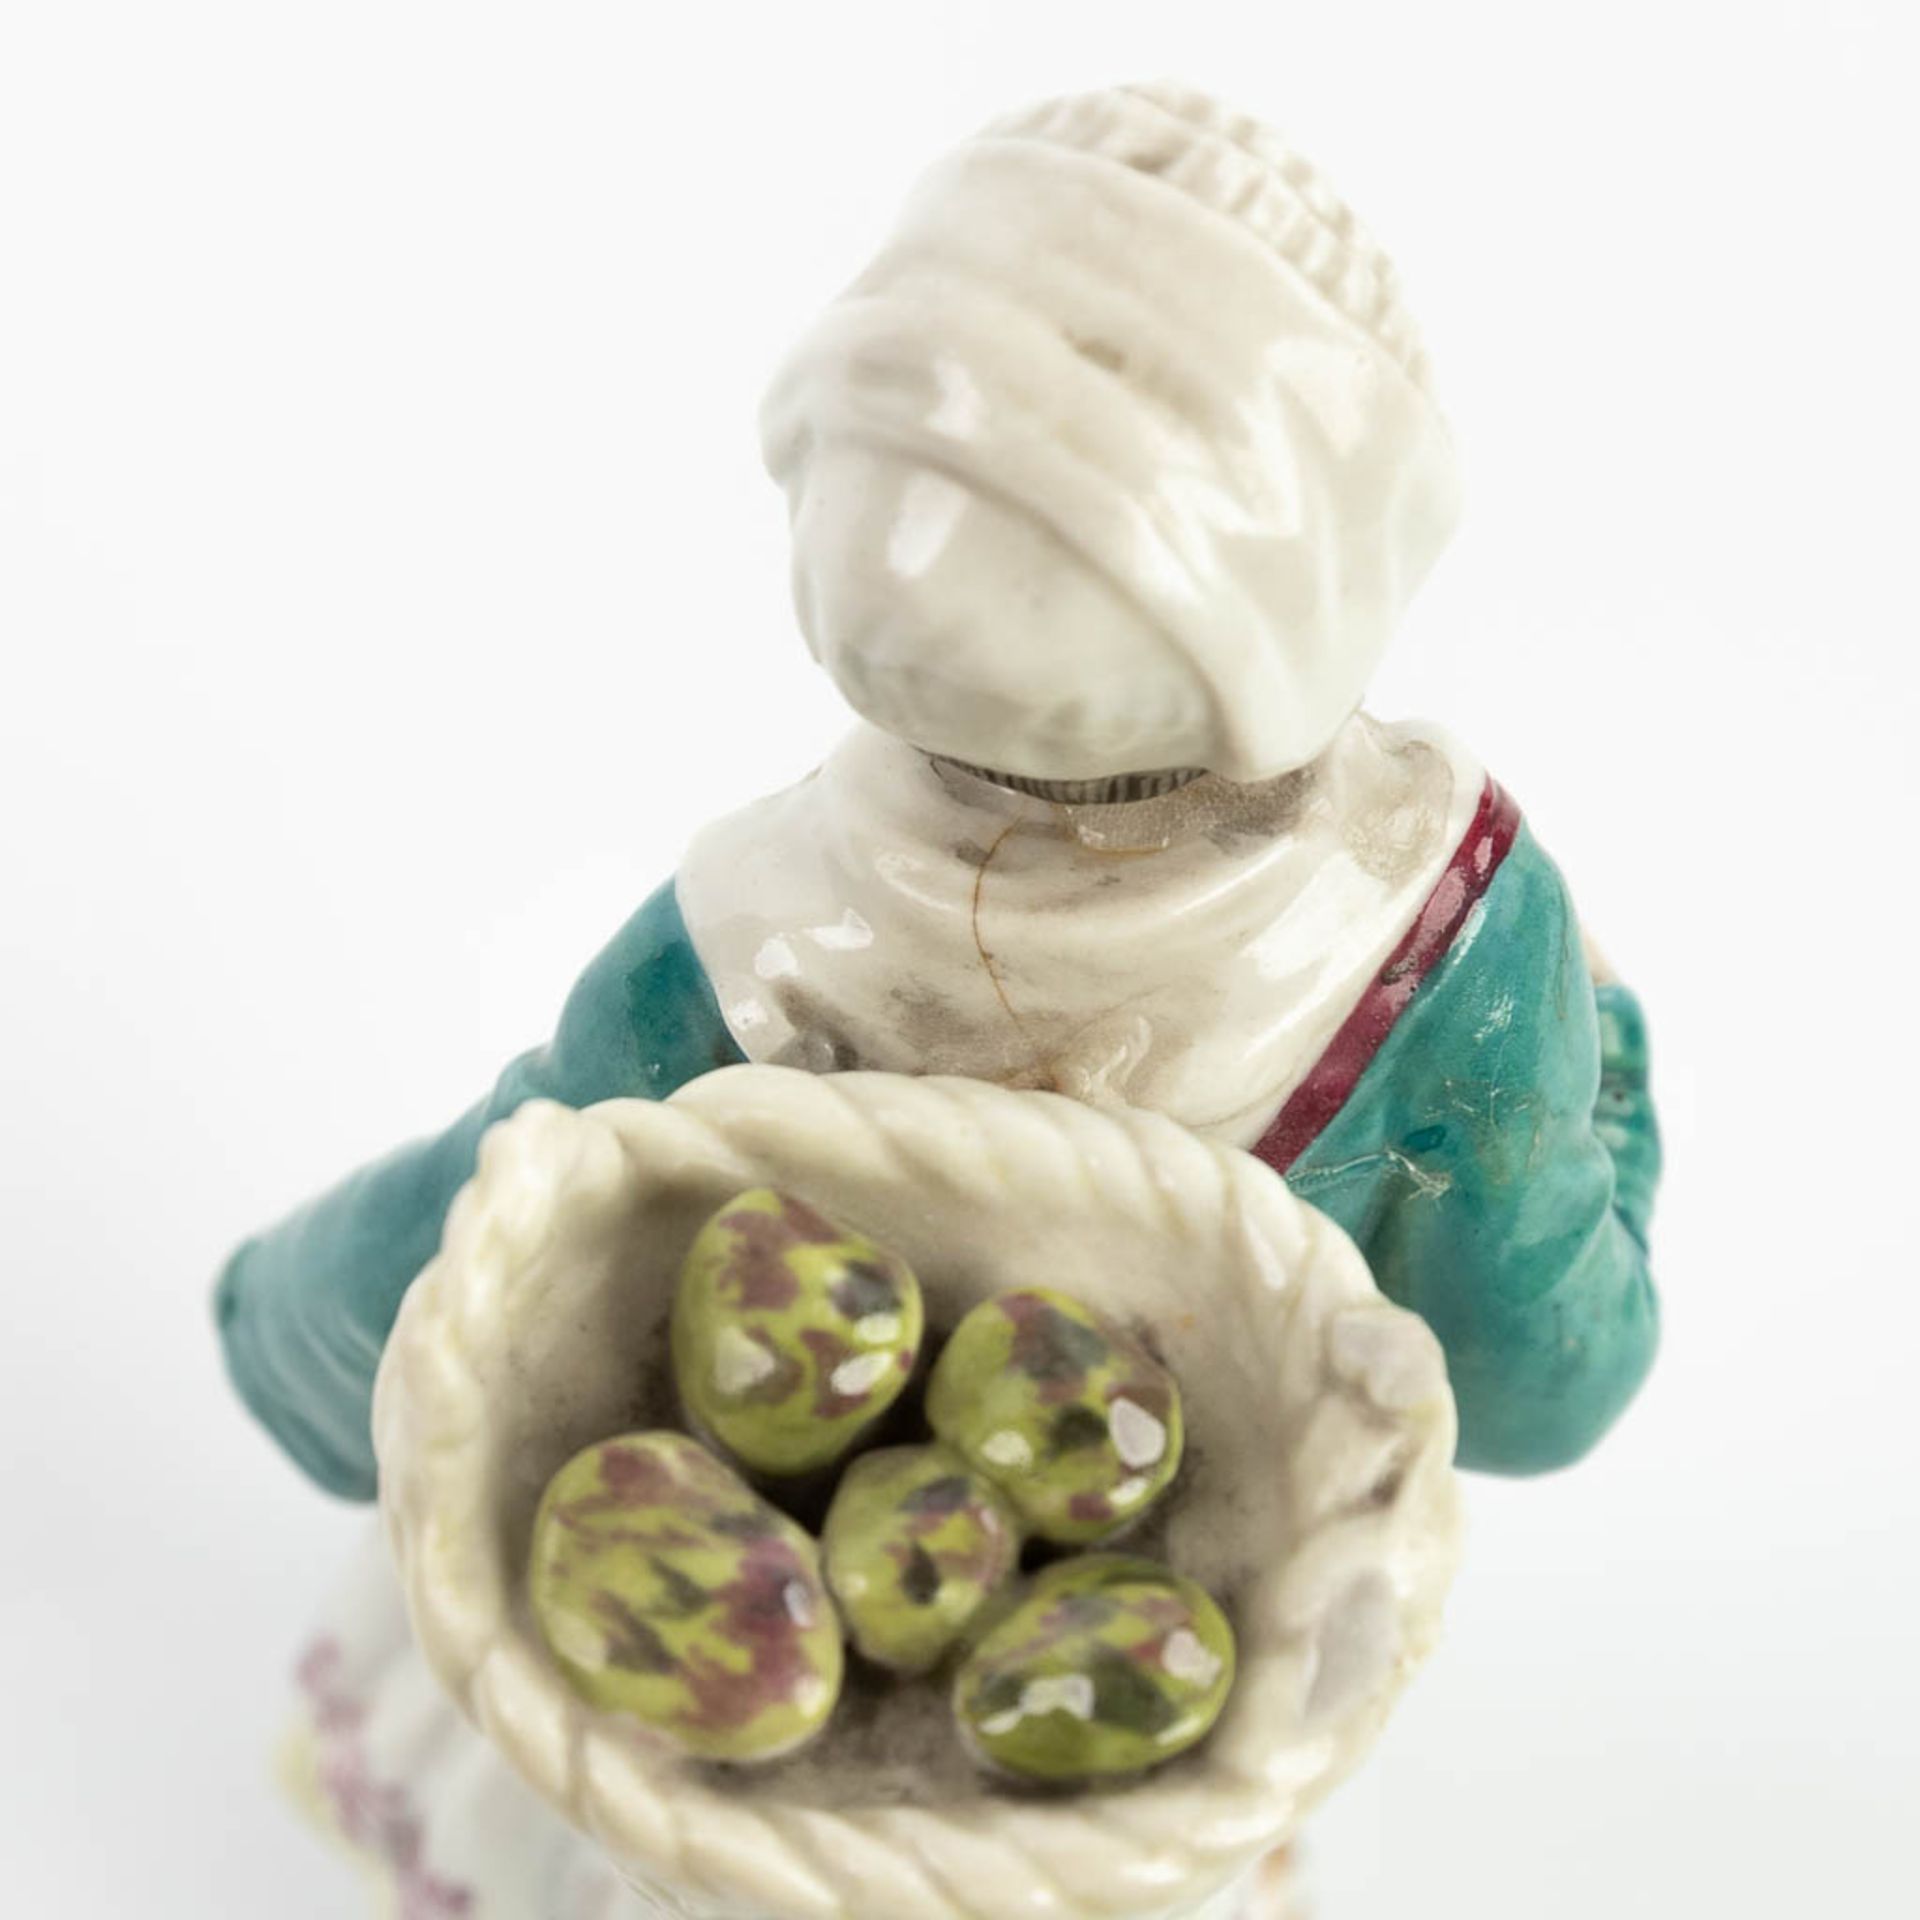 A pair of statues made of porcelain made in Germany and marked Ludwigsburg. (H:18cm) - Image 8 of 16